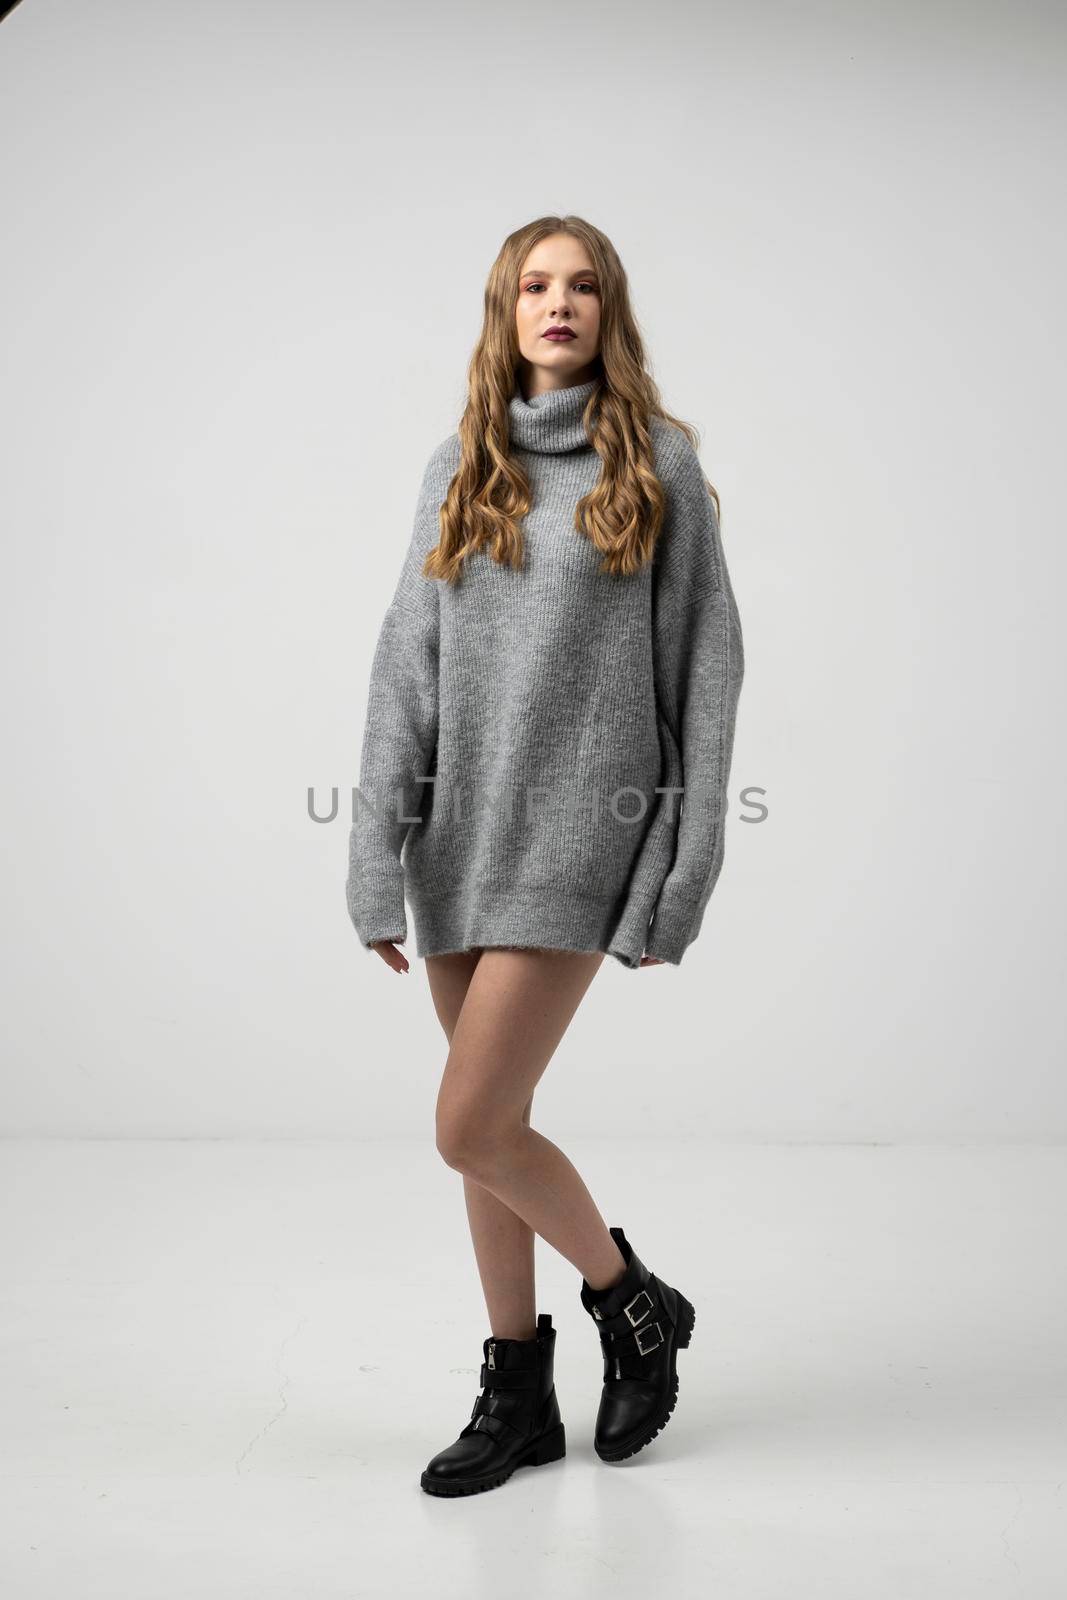 Beautiful young woman portrait in a long sweater. Studio shot, isolated on gray background. by vovsht